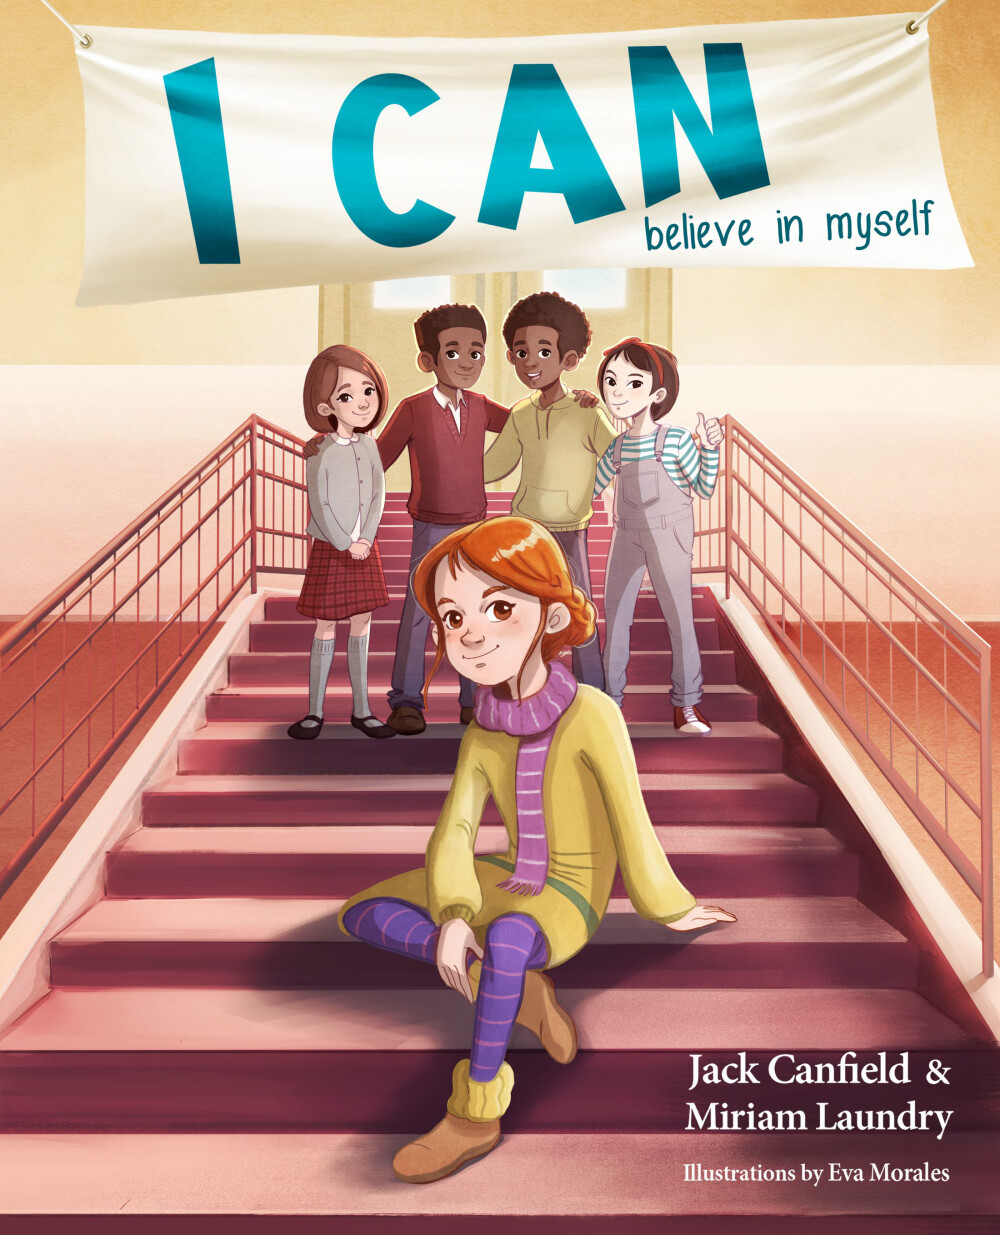 I CAN Believe in Myself
Author: Miriam Laundry and Jack Canfield
Illustrator: Eva Morales
Publisher: Health Communications - 2021
Languaje: English
ISBN-10 : 075732388X
ISBN-13 : 978-0757323881